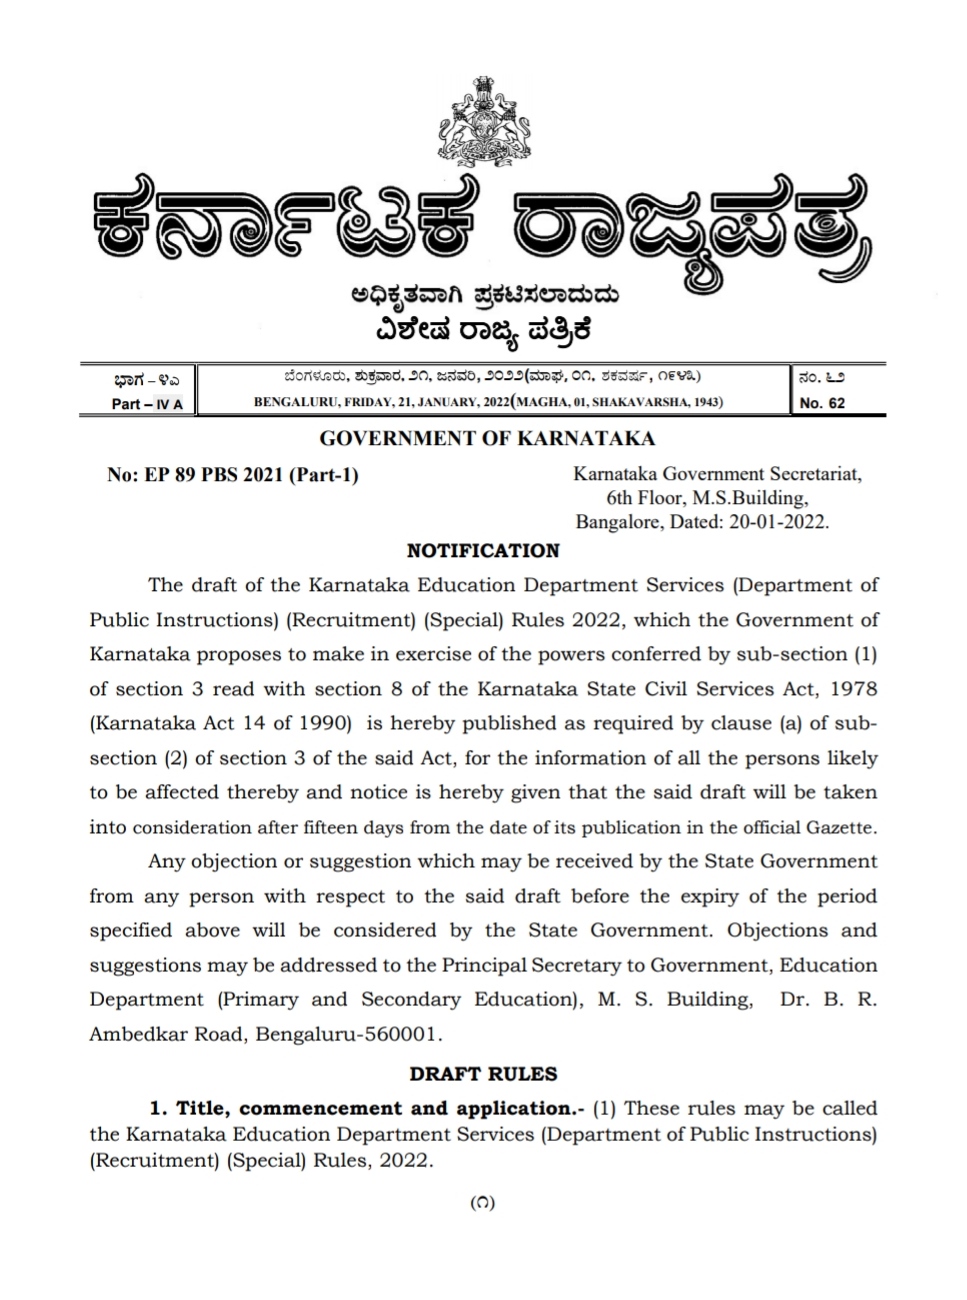 Final Rules of Karnataka State Department of Education for Recruitment of Graduate Primary Teacher (GPT) of 15,000 Graduate Primary School Teachers